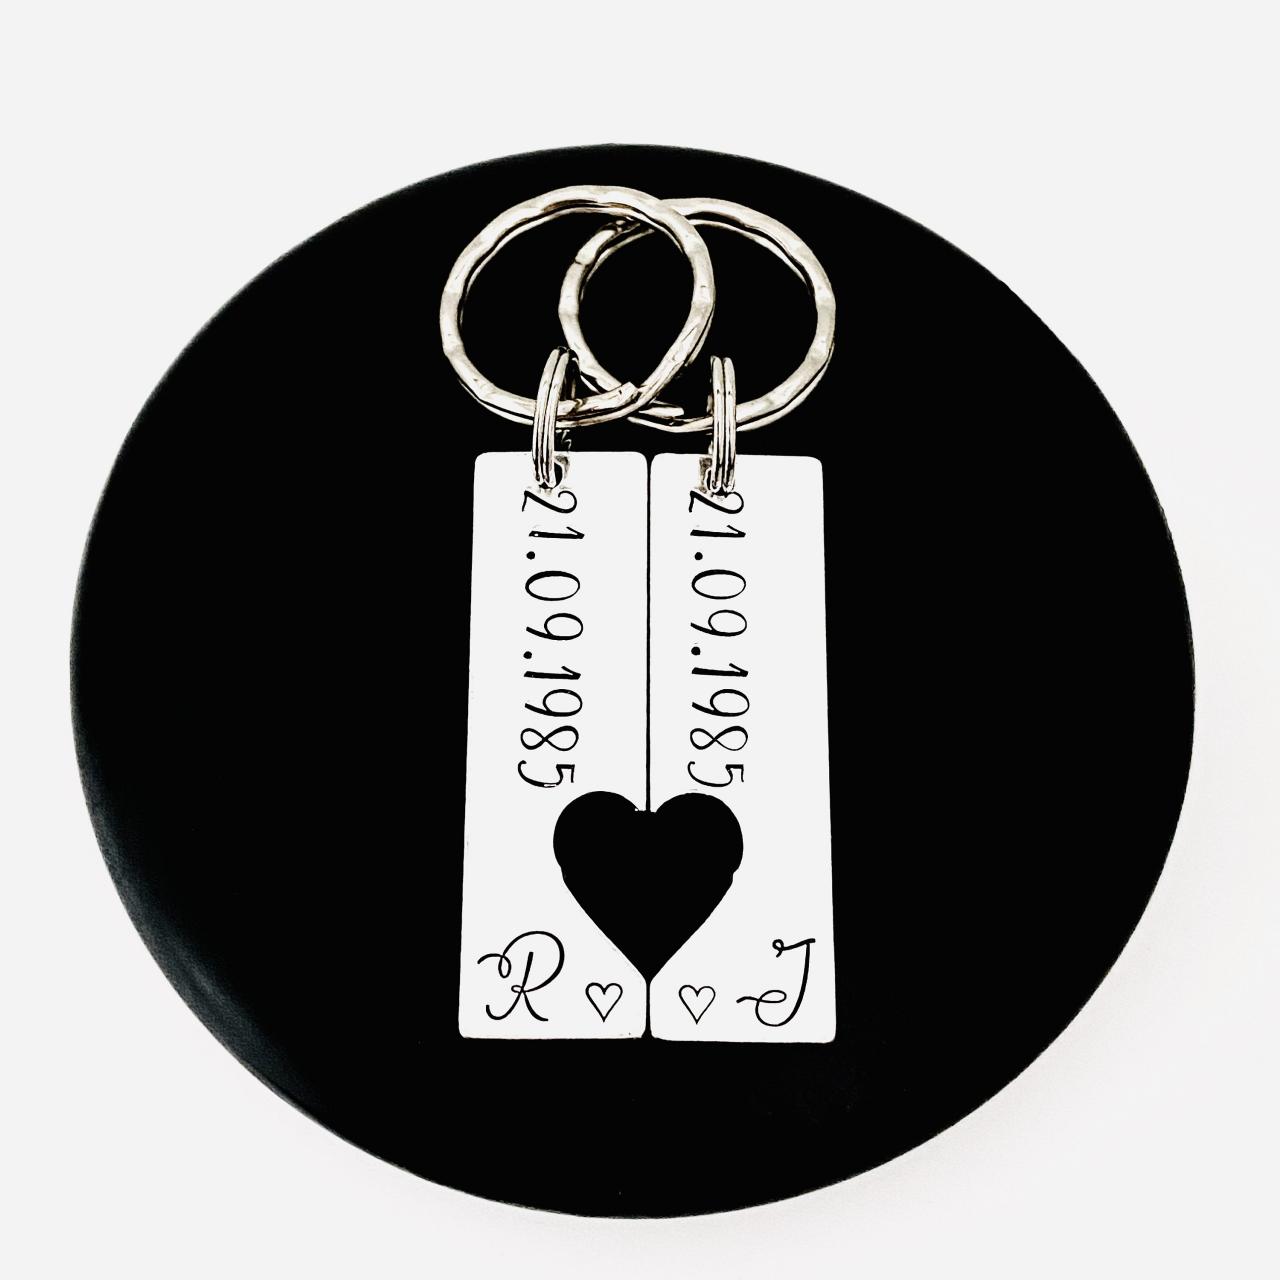 Couples Keyrings, Personalised Wedding Gift, Anniversary Present, Valentines Gift, Special Date, His And Her Keychain, Husband And Wife Gift